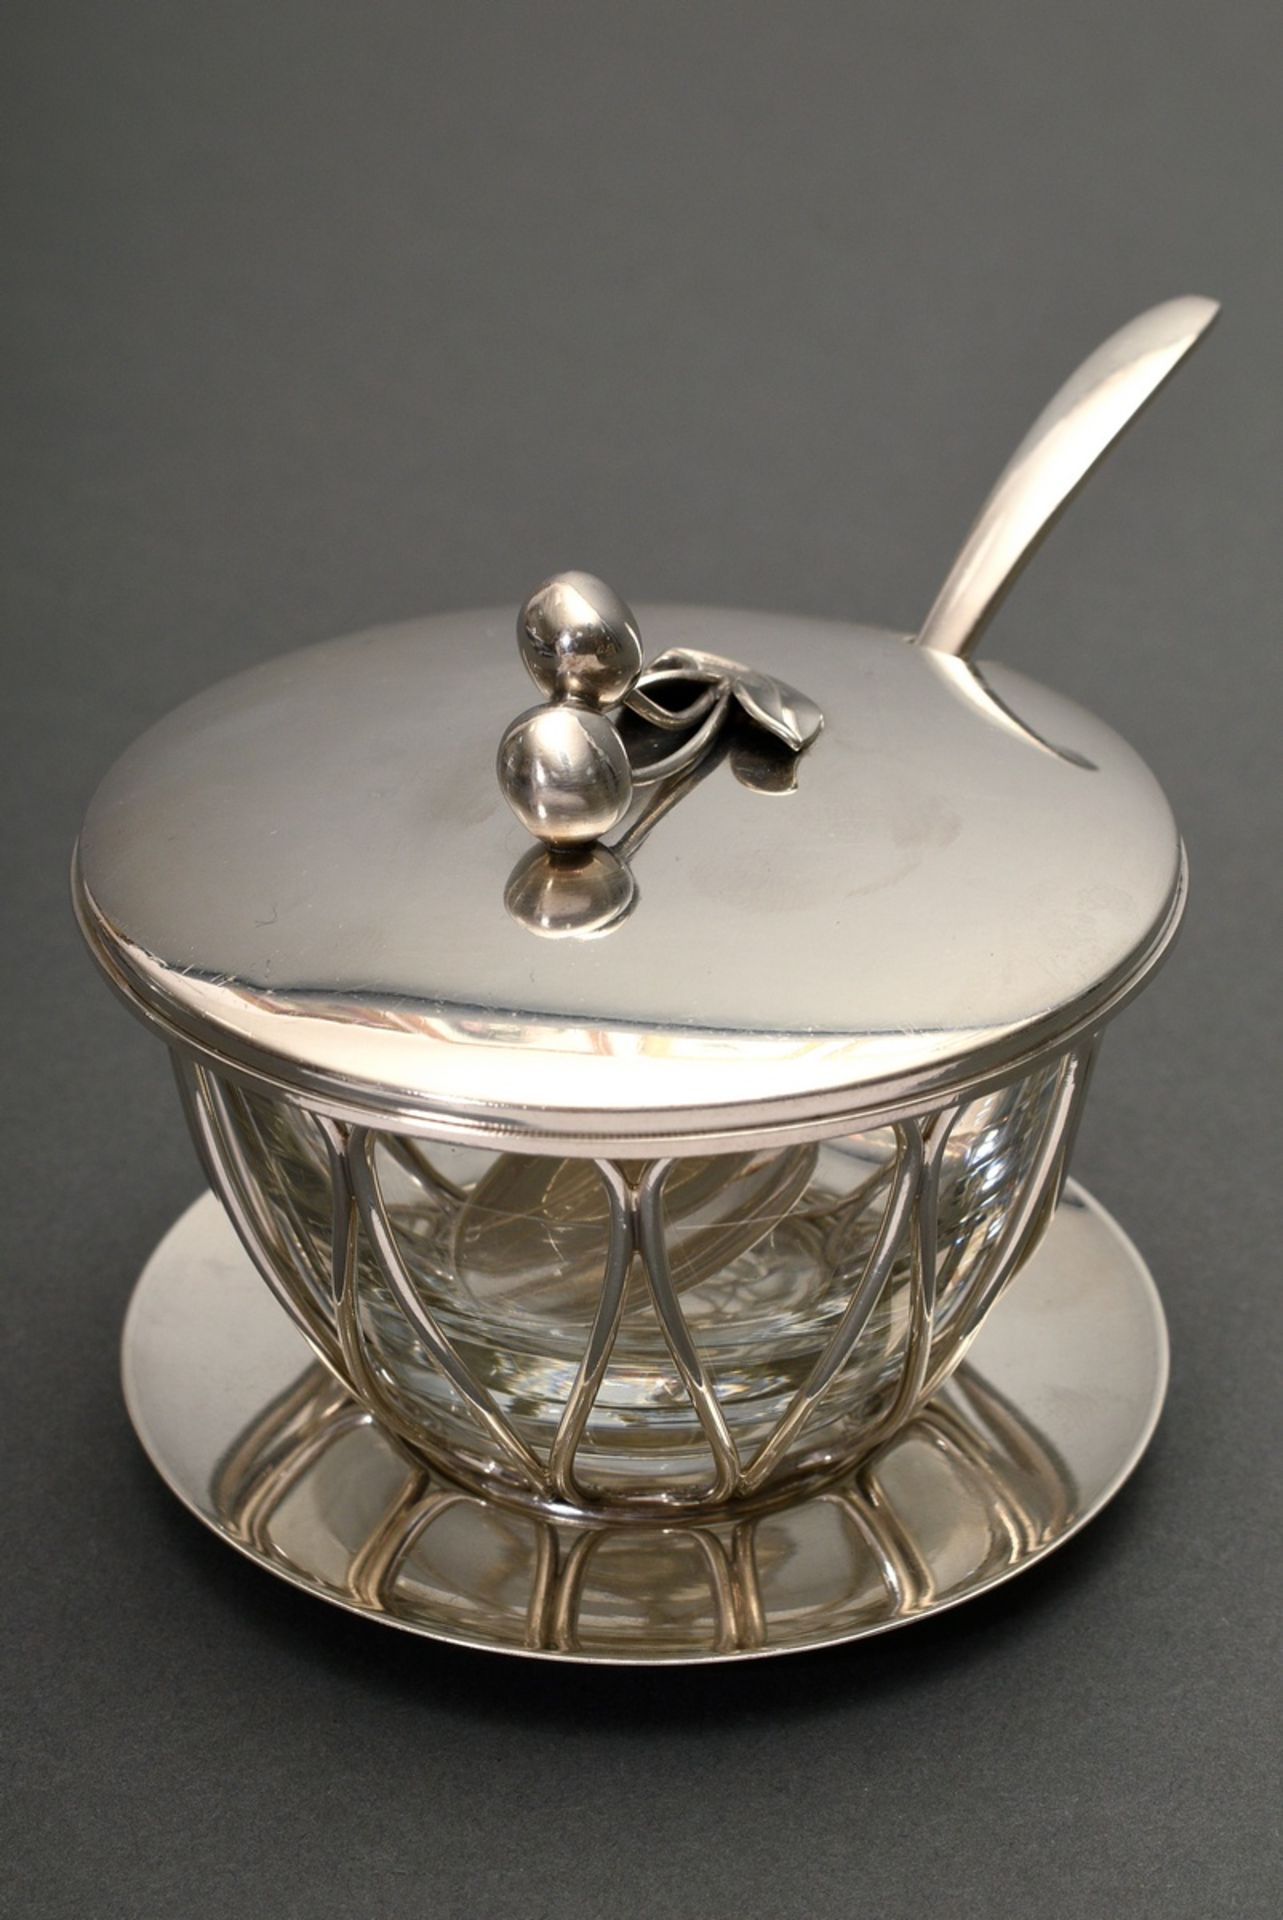 Midcentury jam pot with sculptural knob ‘cherry’, spoon and glass insert on saucer, MM: H.J. Wilm, 